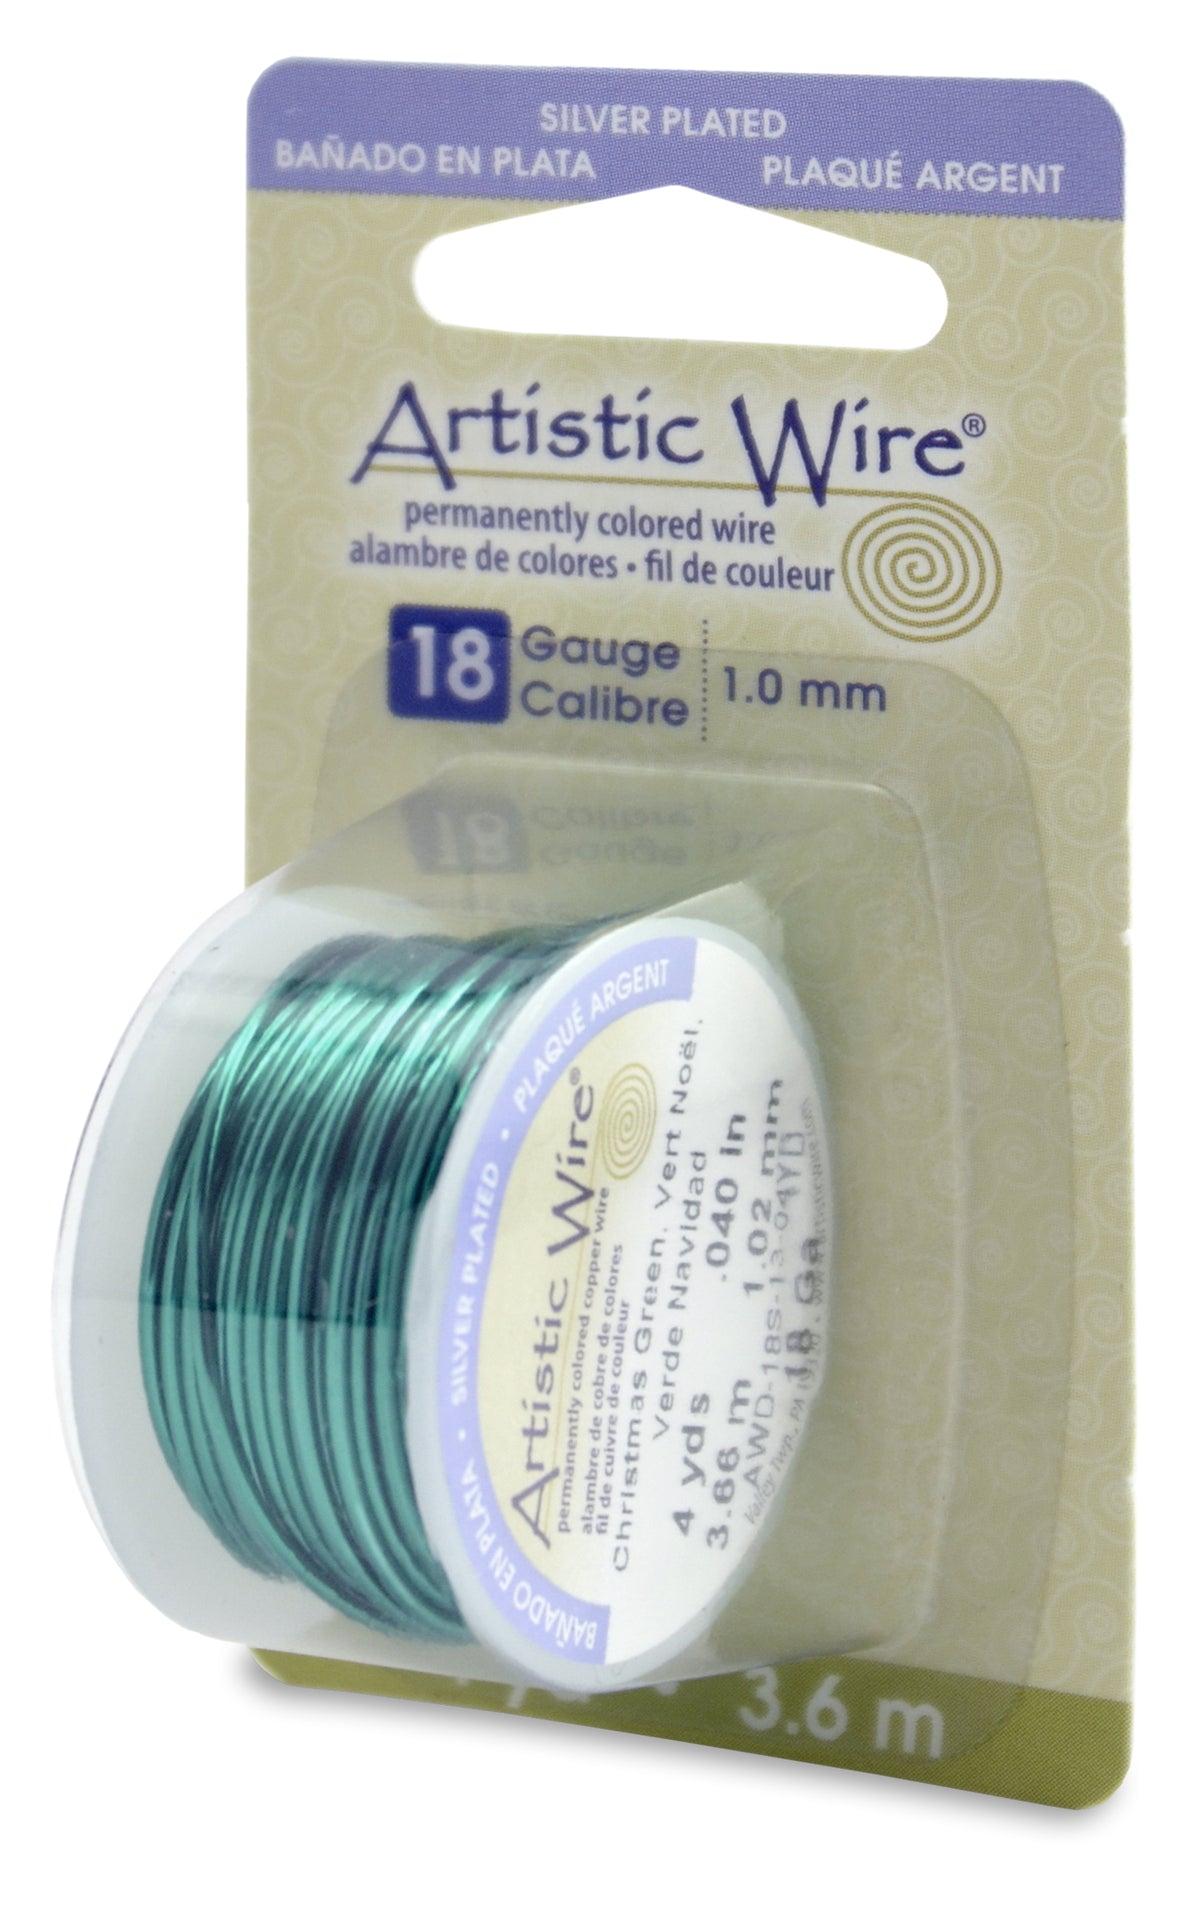 Artistic Wire, 18 Gauge (1.0 mm), Silver Plated, Christmas Green, 4 yd (3.6 m)